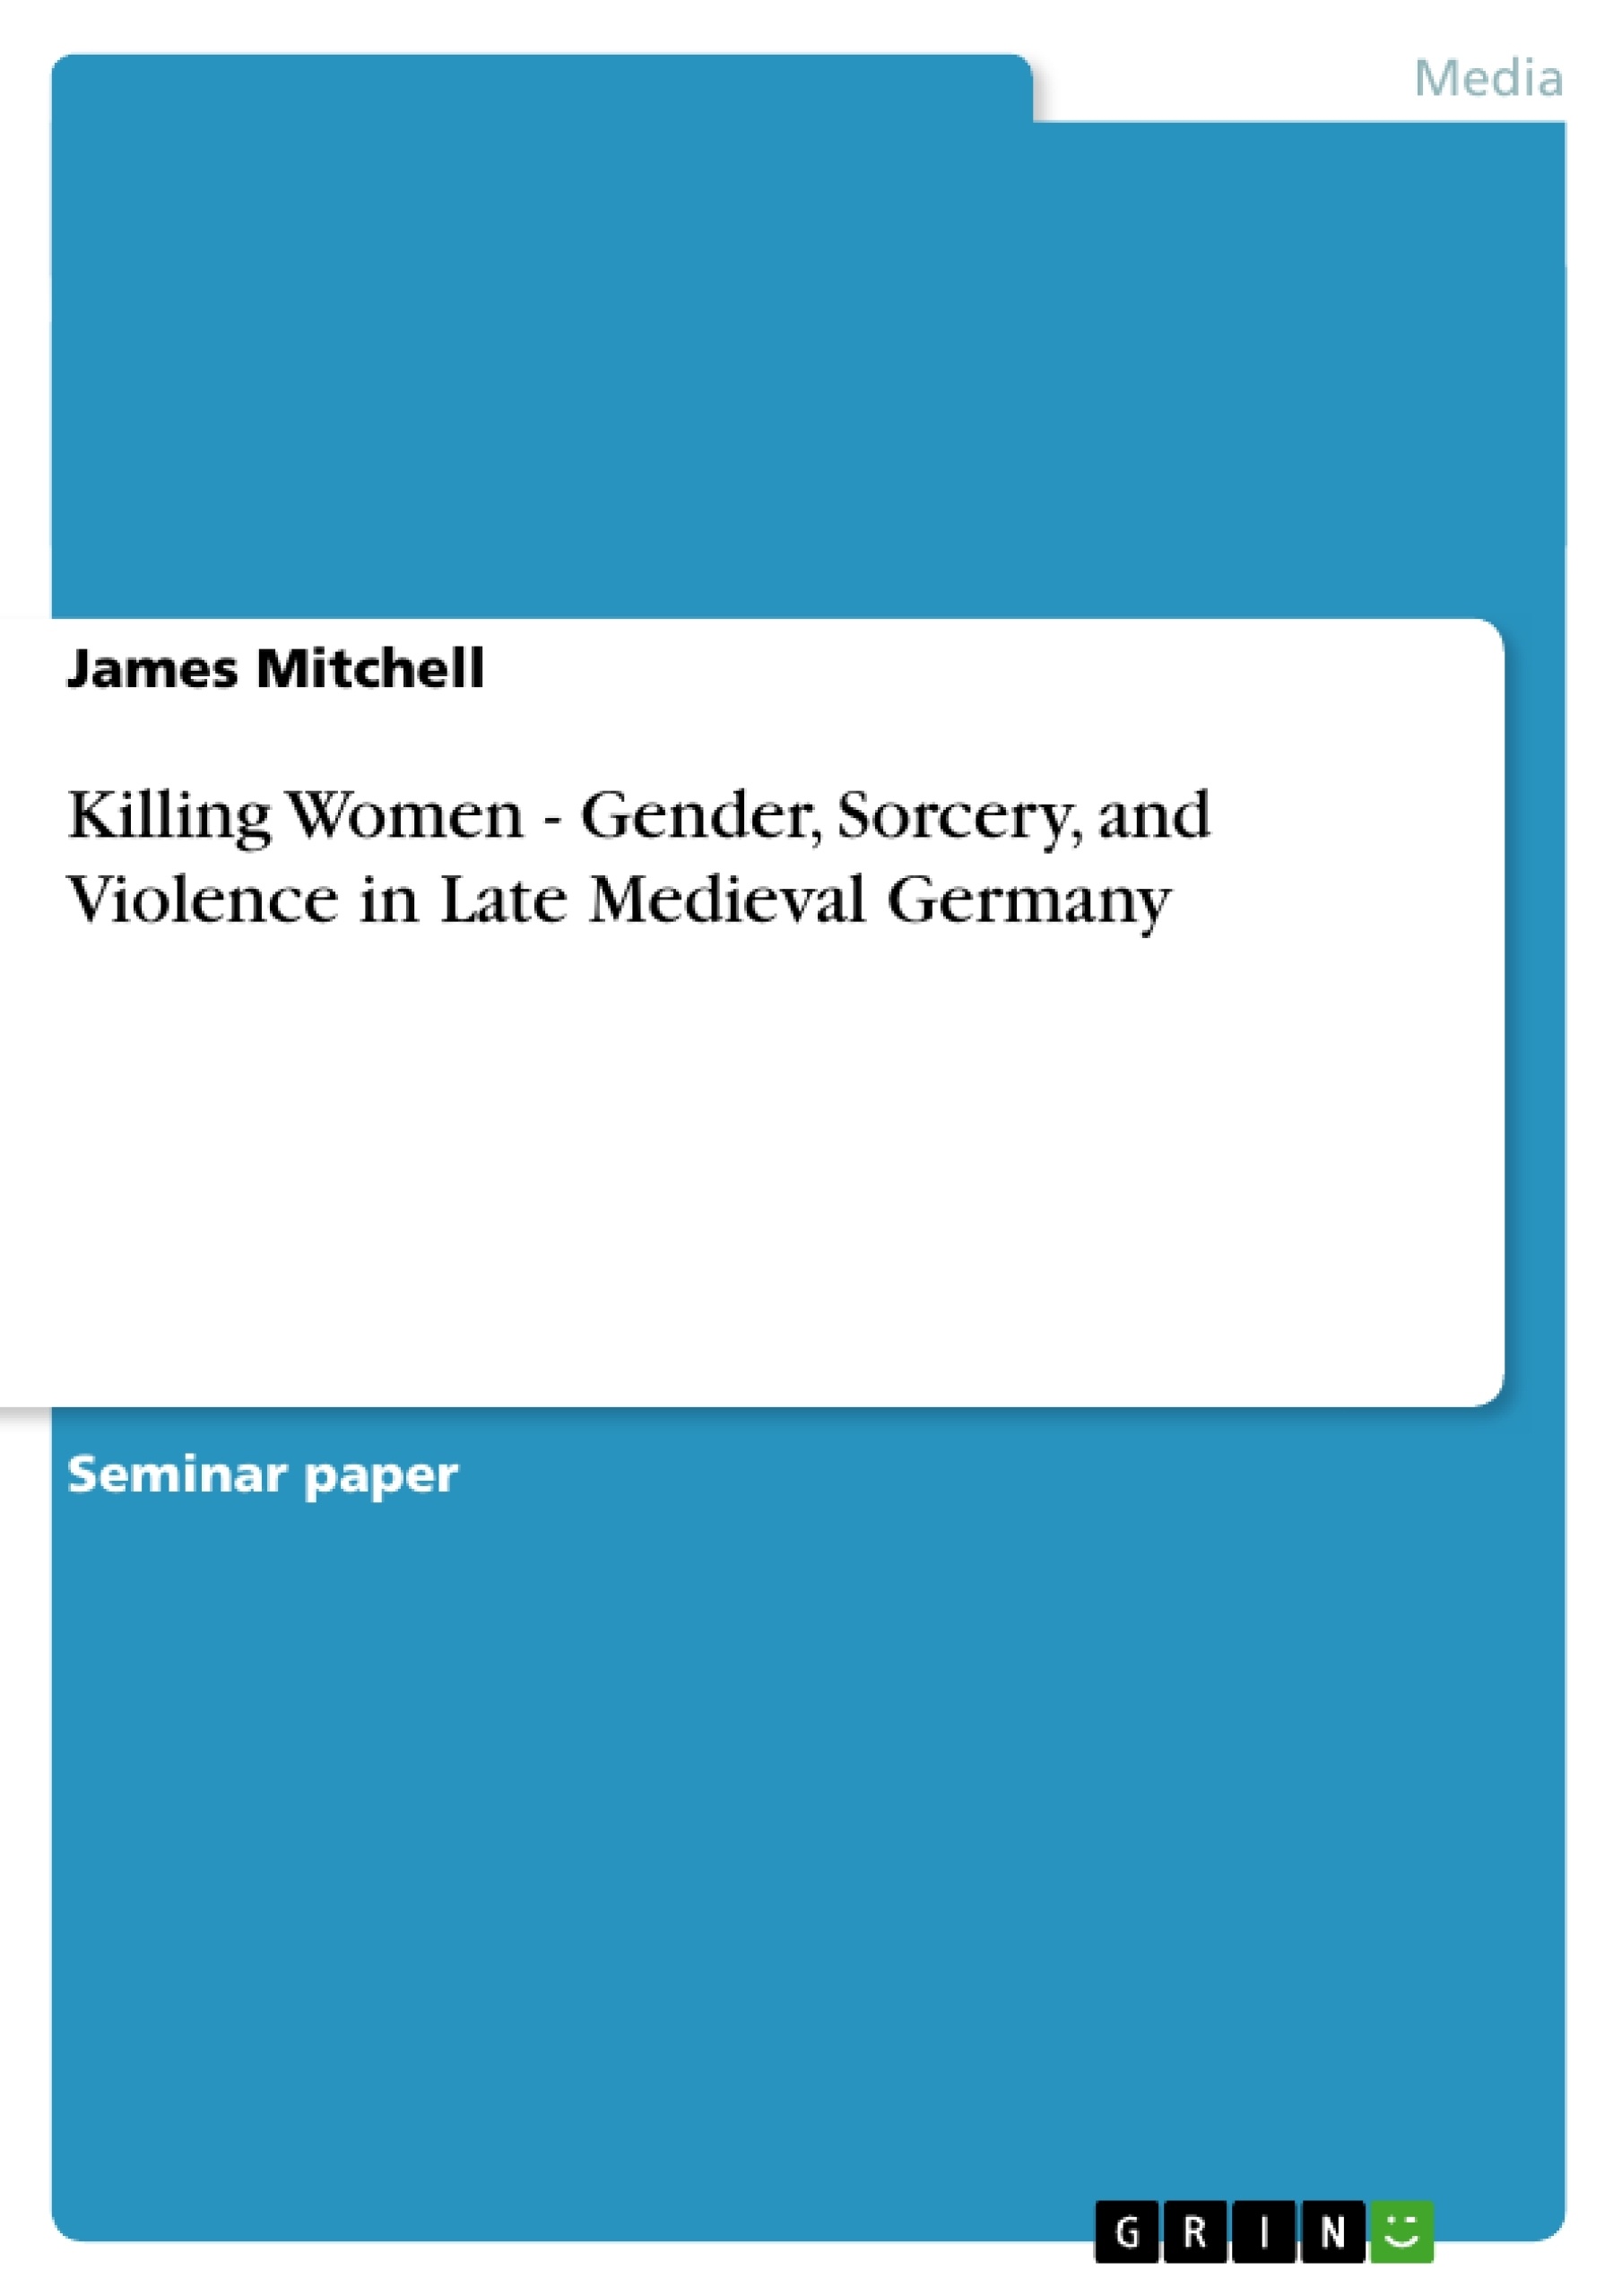 Title: Killing Women - Gender, Sorcery, and Violence in Late Medieval Germany